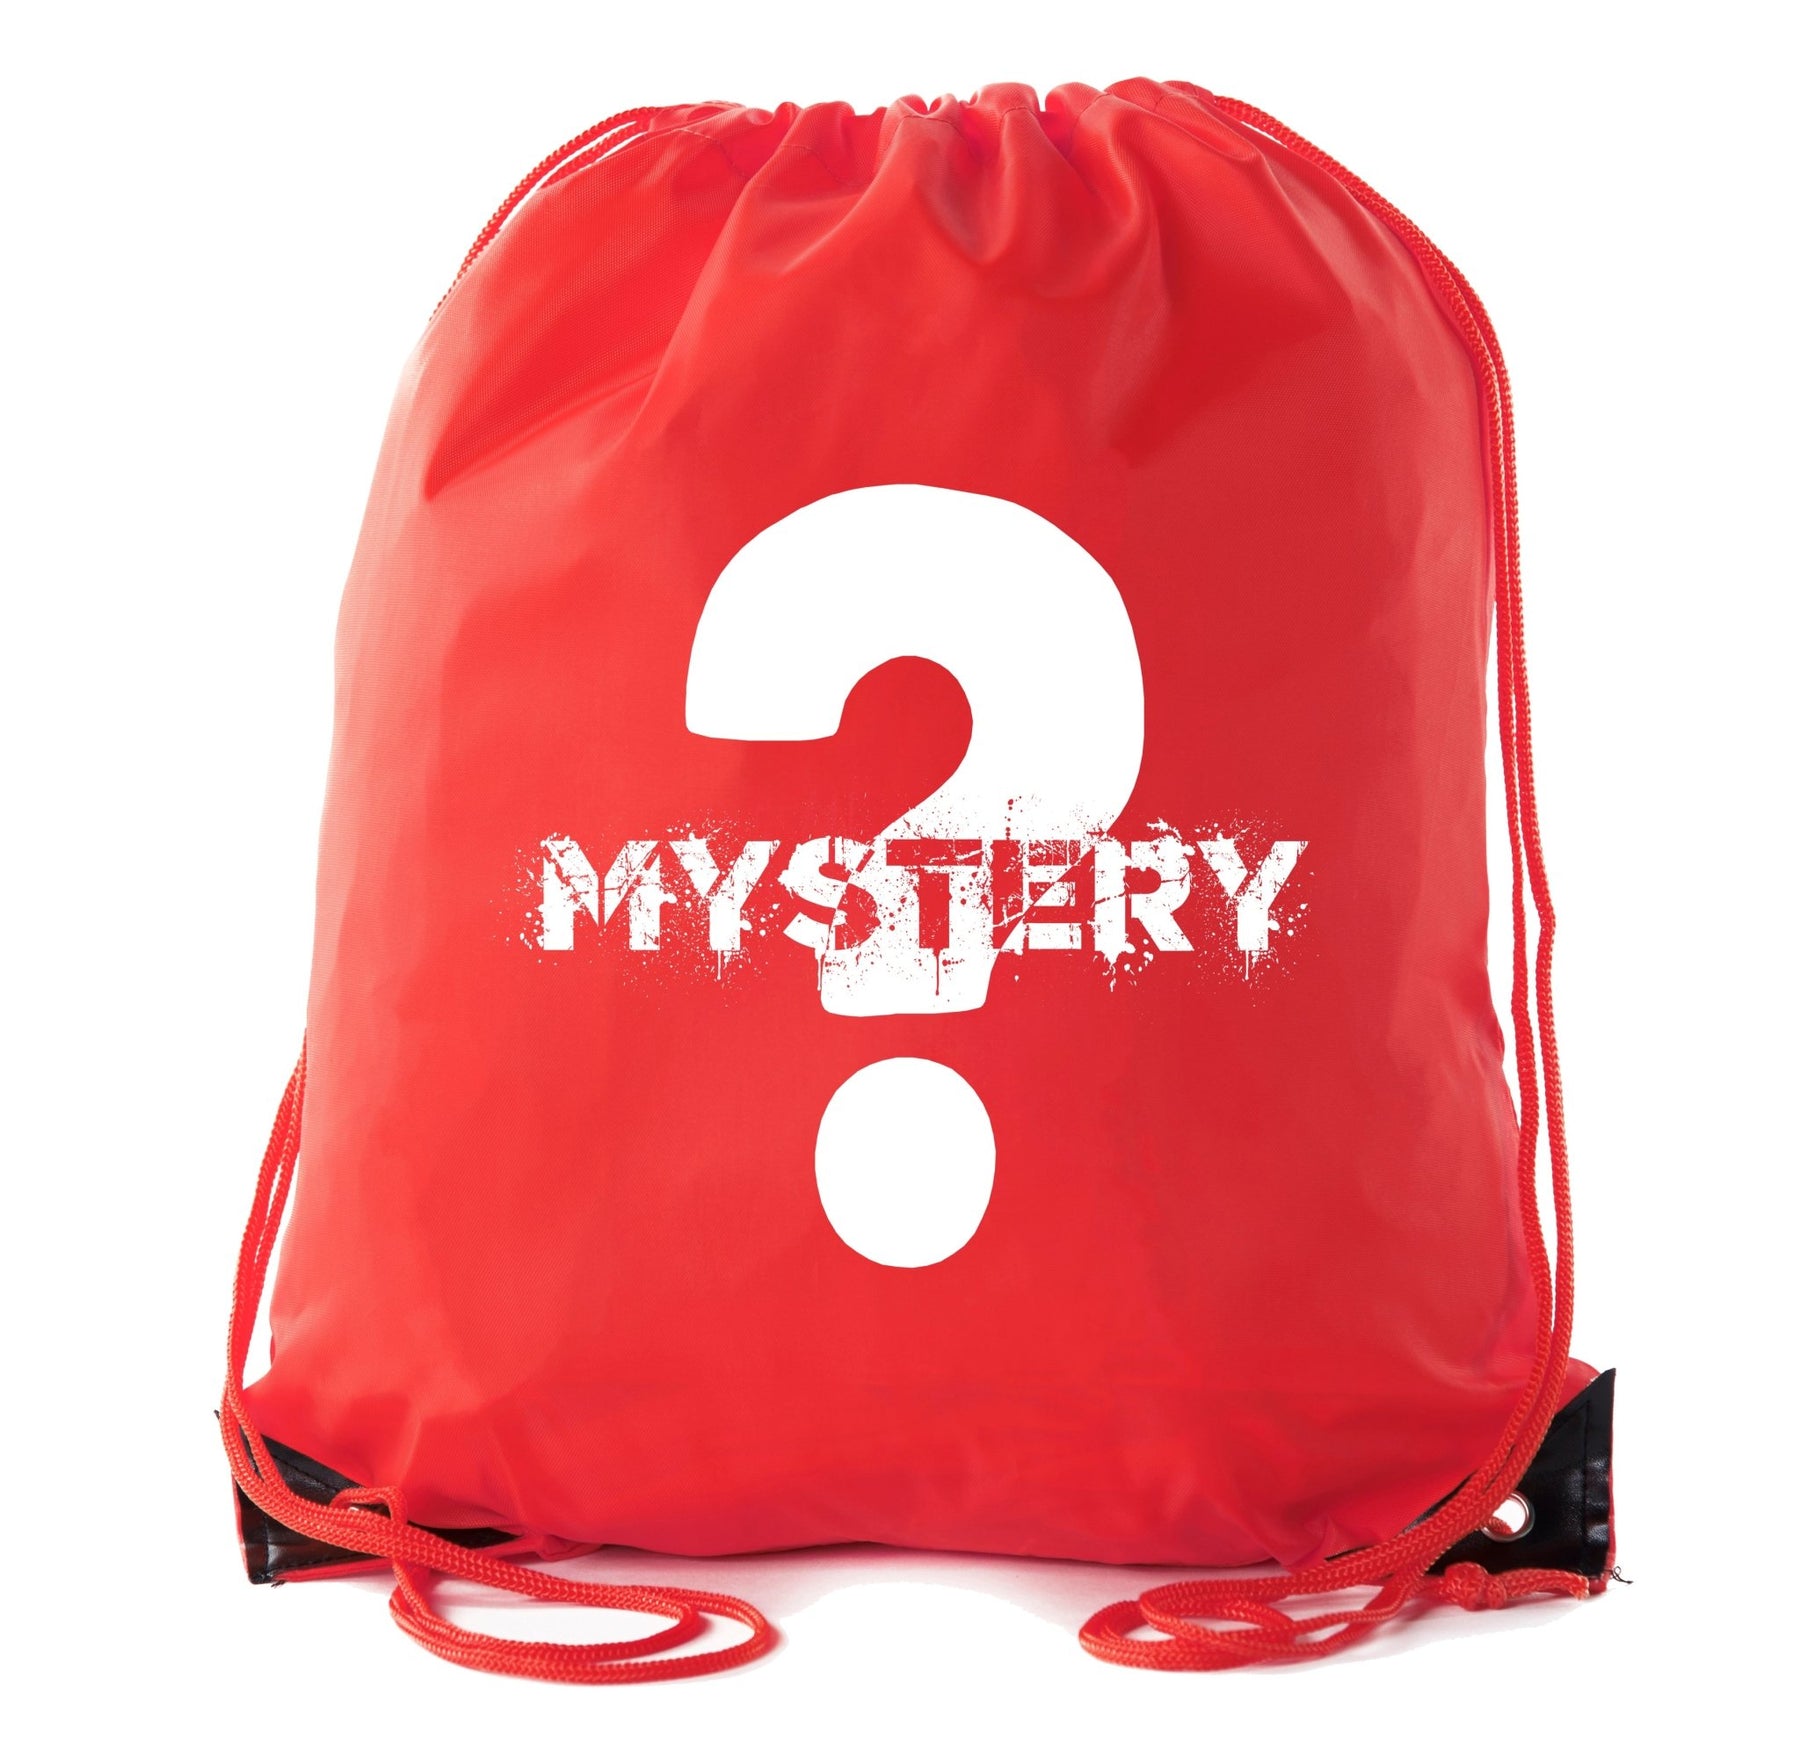 Mystery Question Mark Polyester Drawstring Bag - Mato & Hash